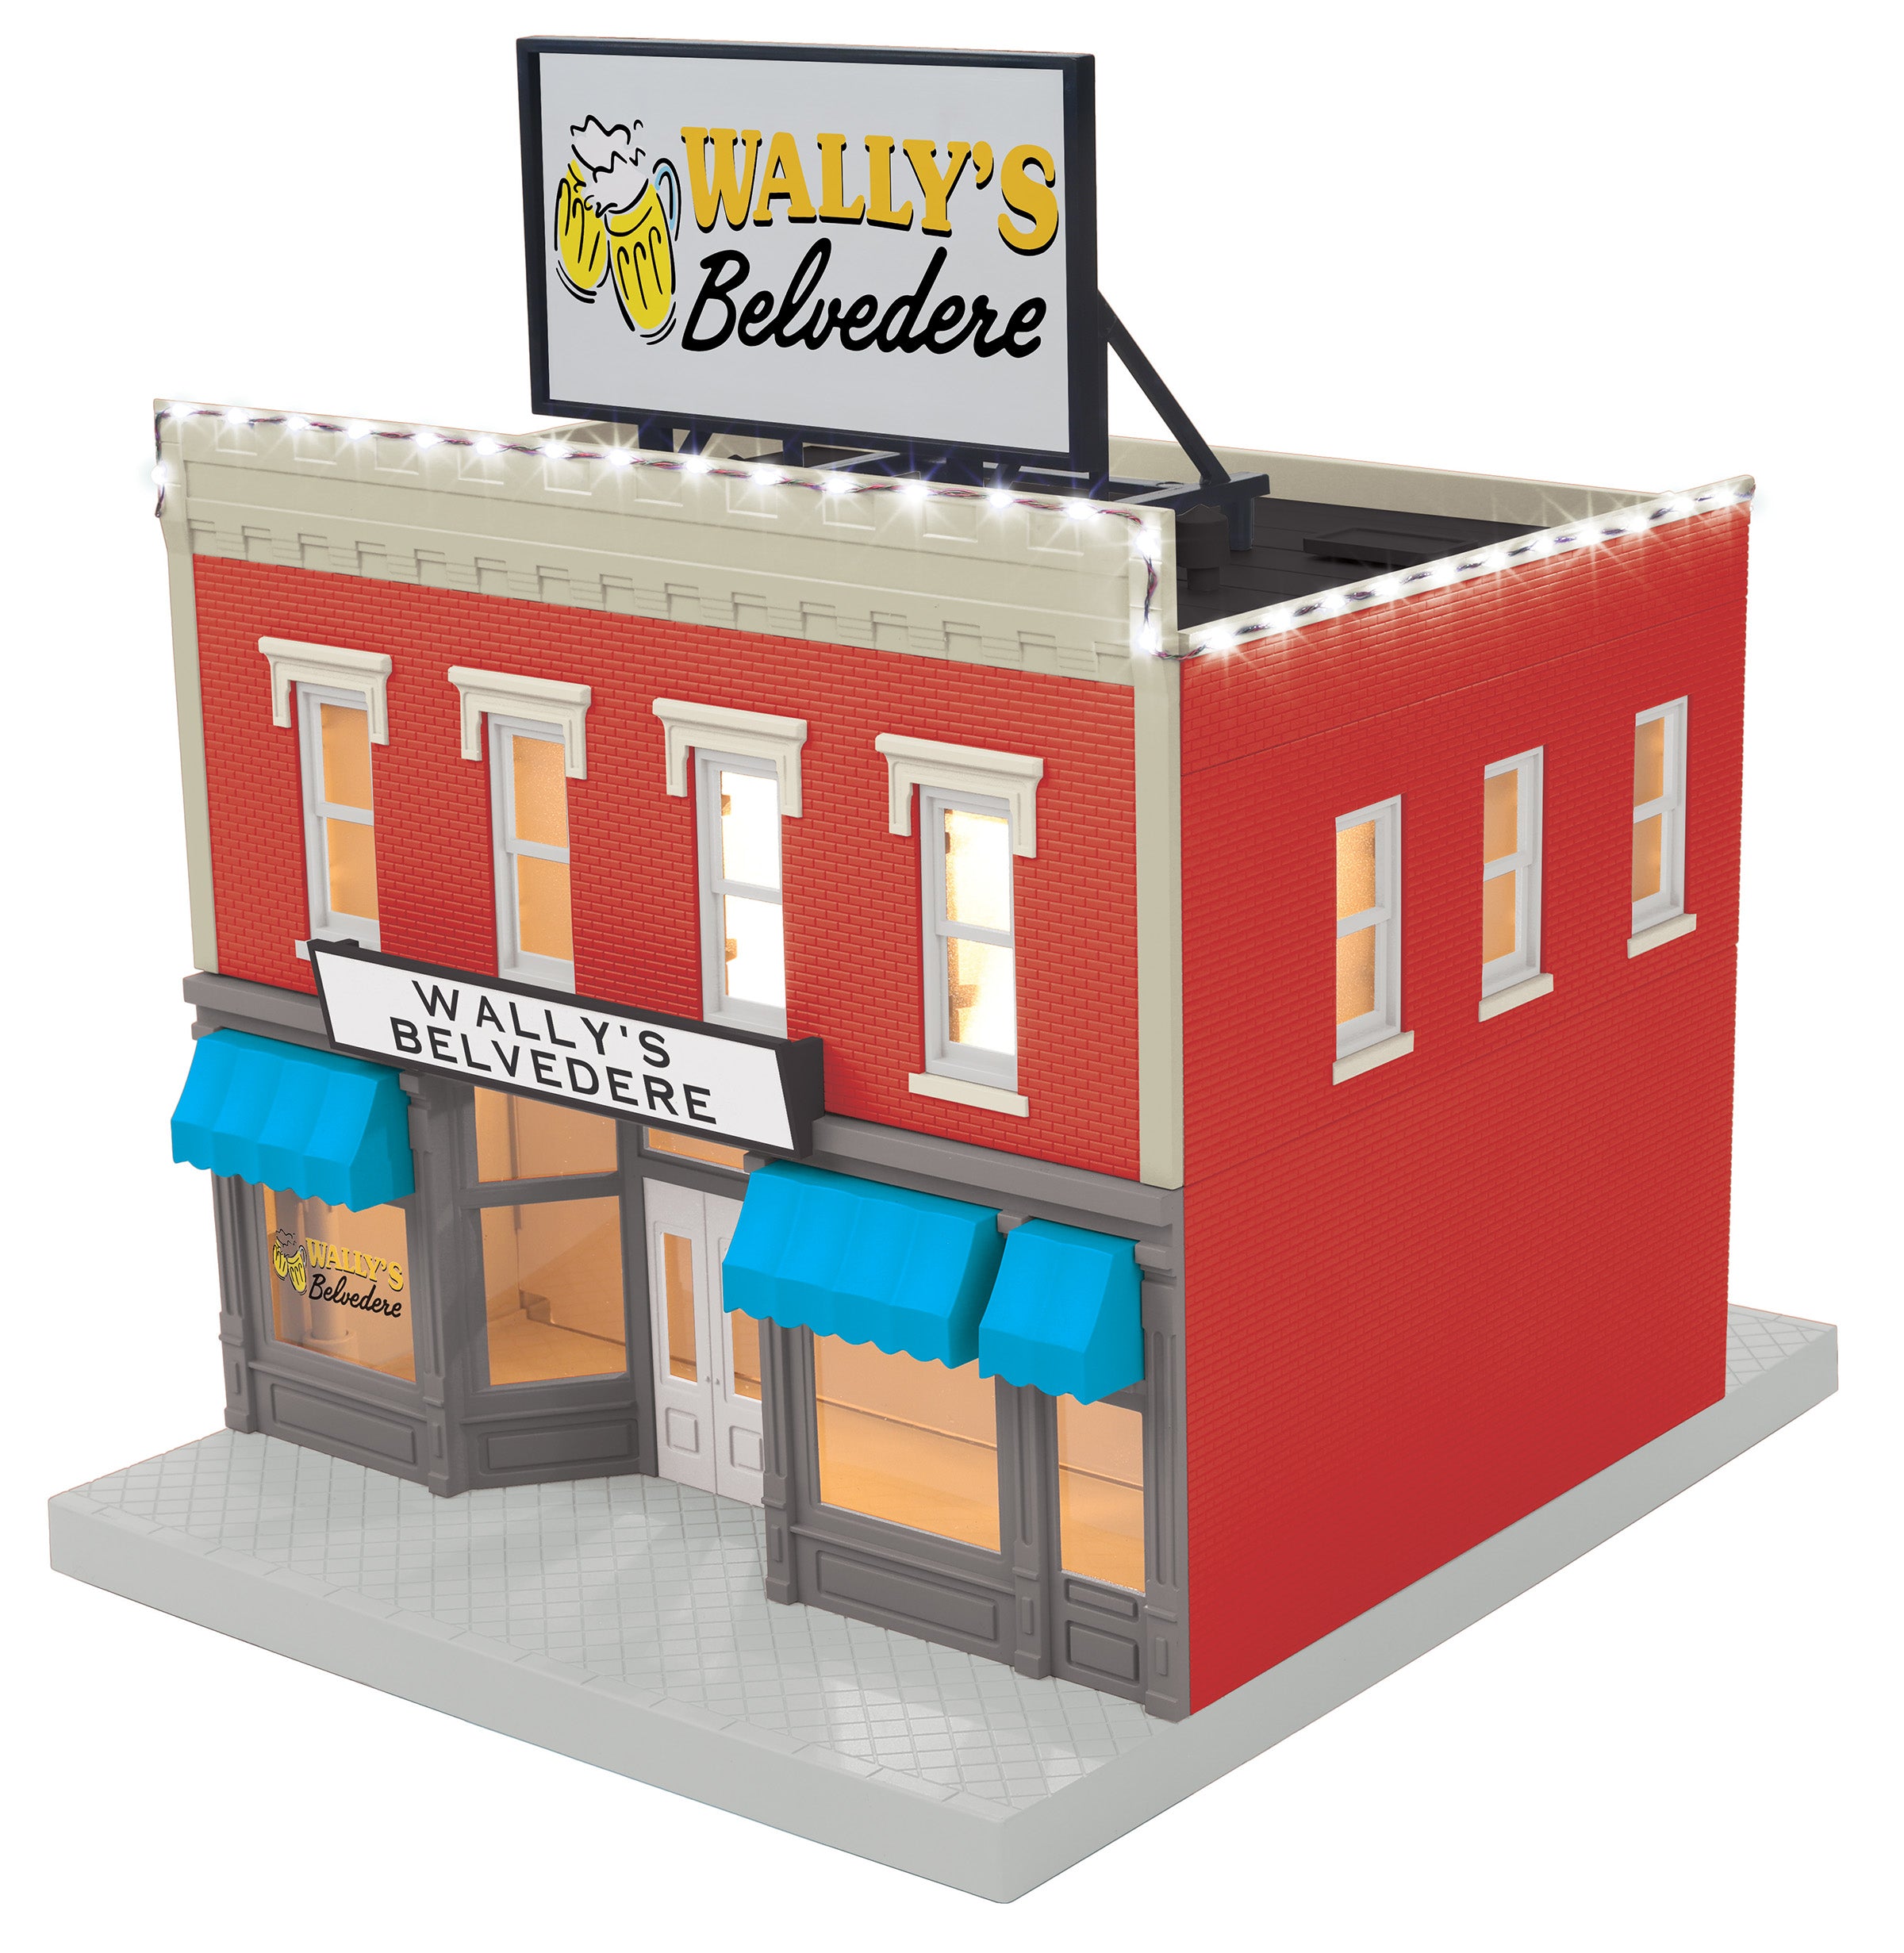 MTH 30-90684 - 2-Story City Building 1 "Wally’s Belvedere Tavern" w/ LEDs